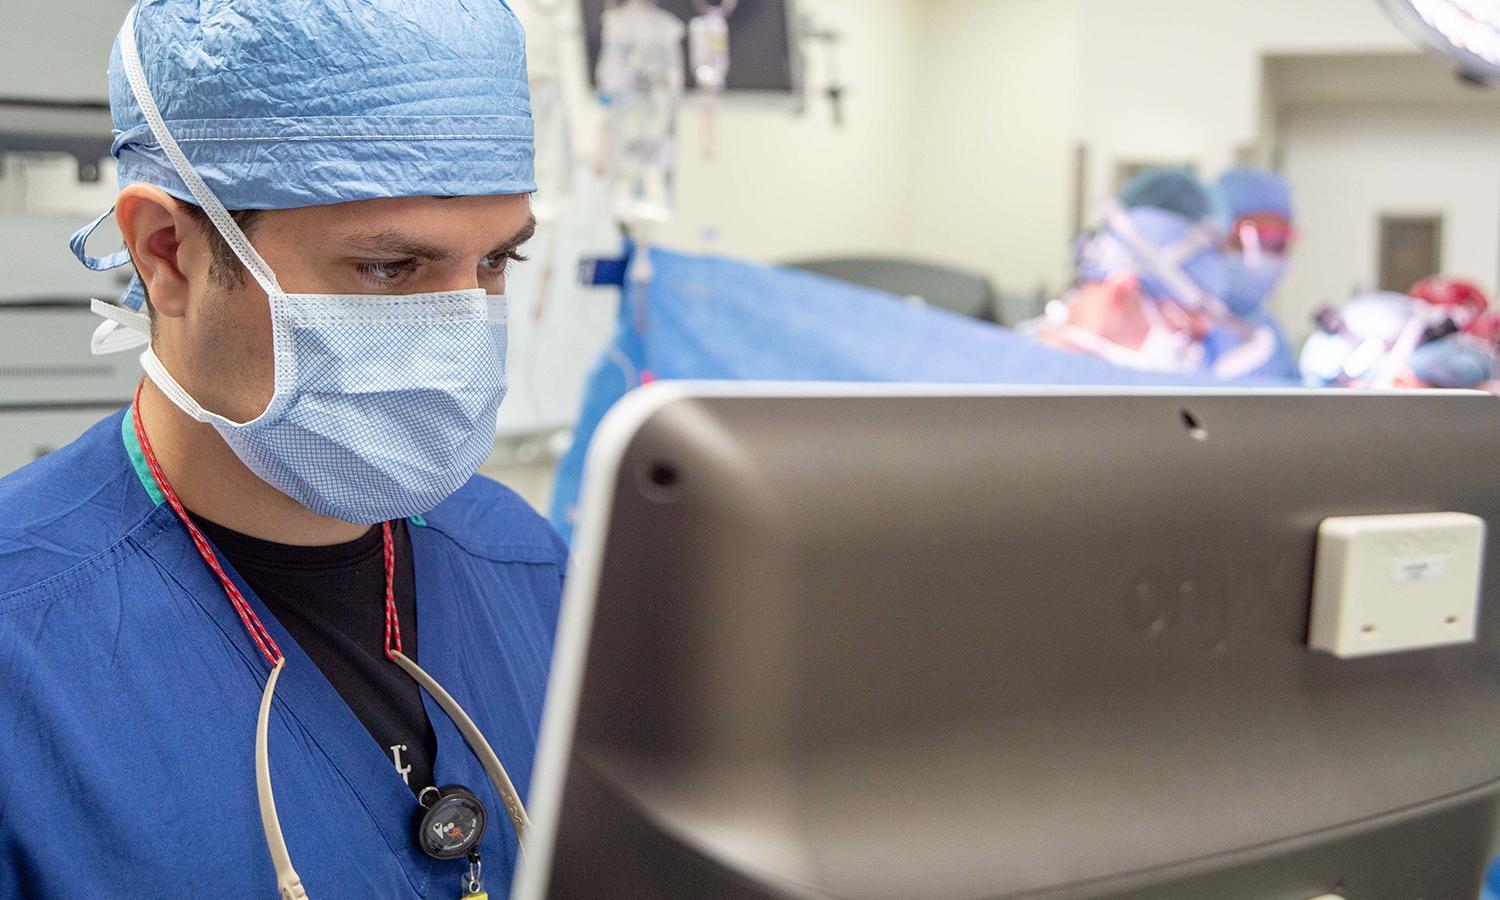 An anesthesiologist monitors a patient's vital signs during surgery.